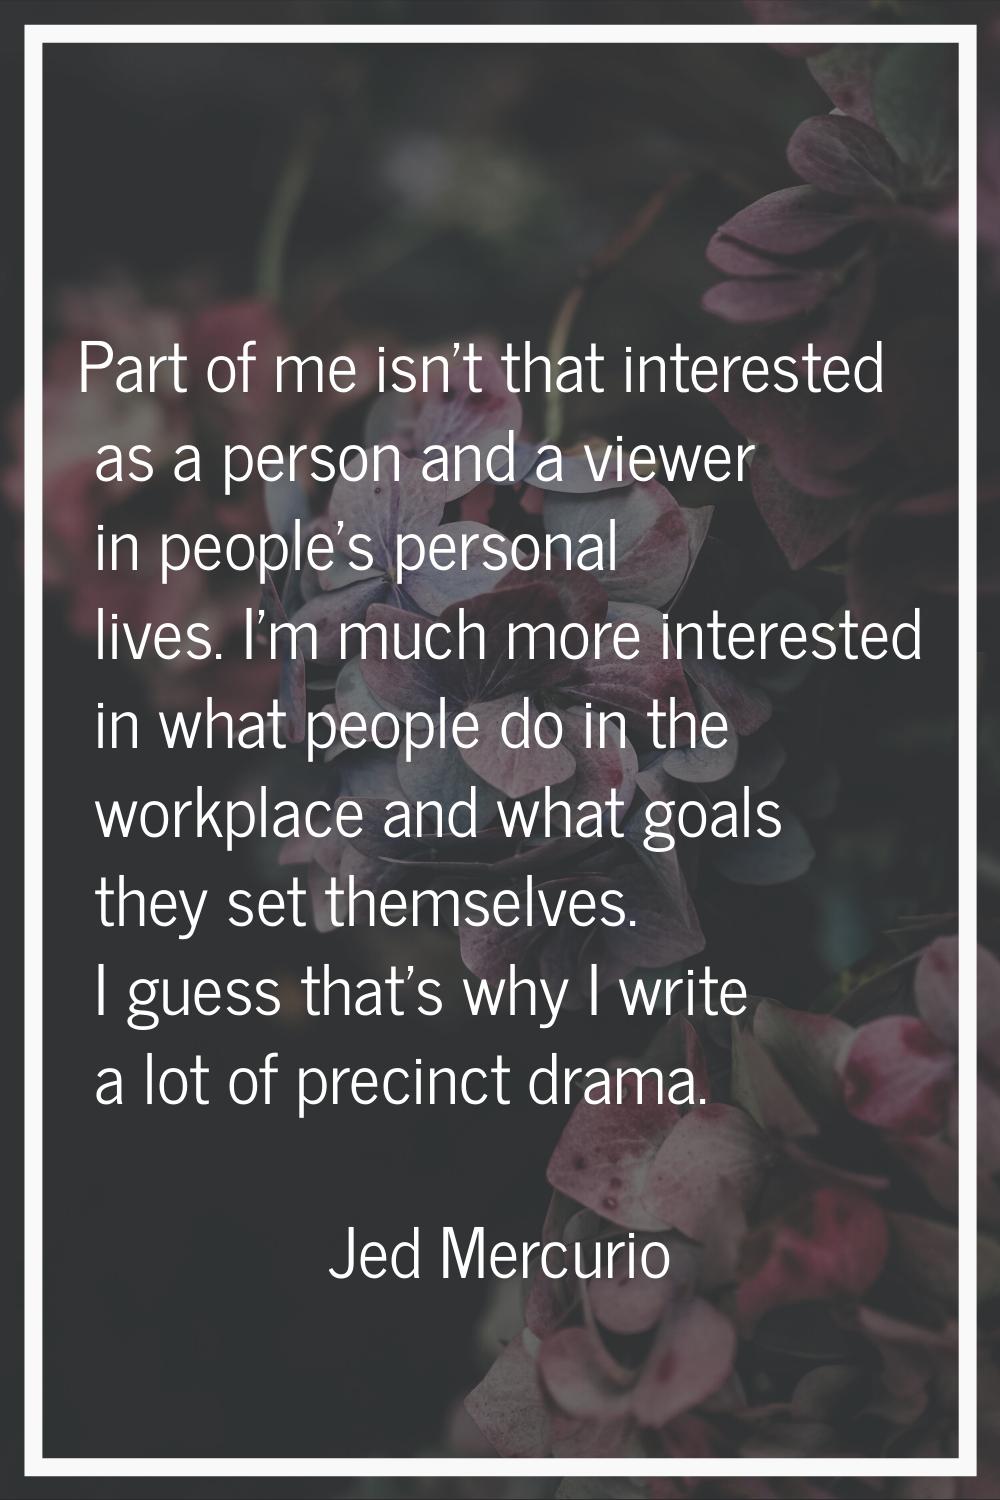 Part of me isn't that interested as a person and a viewer in people's personal lives. I'm much more